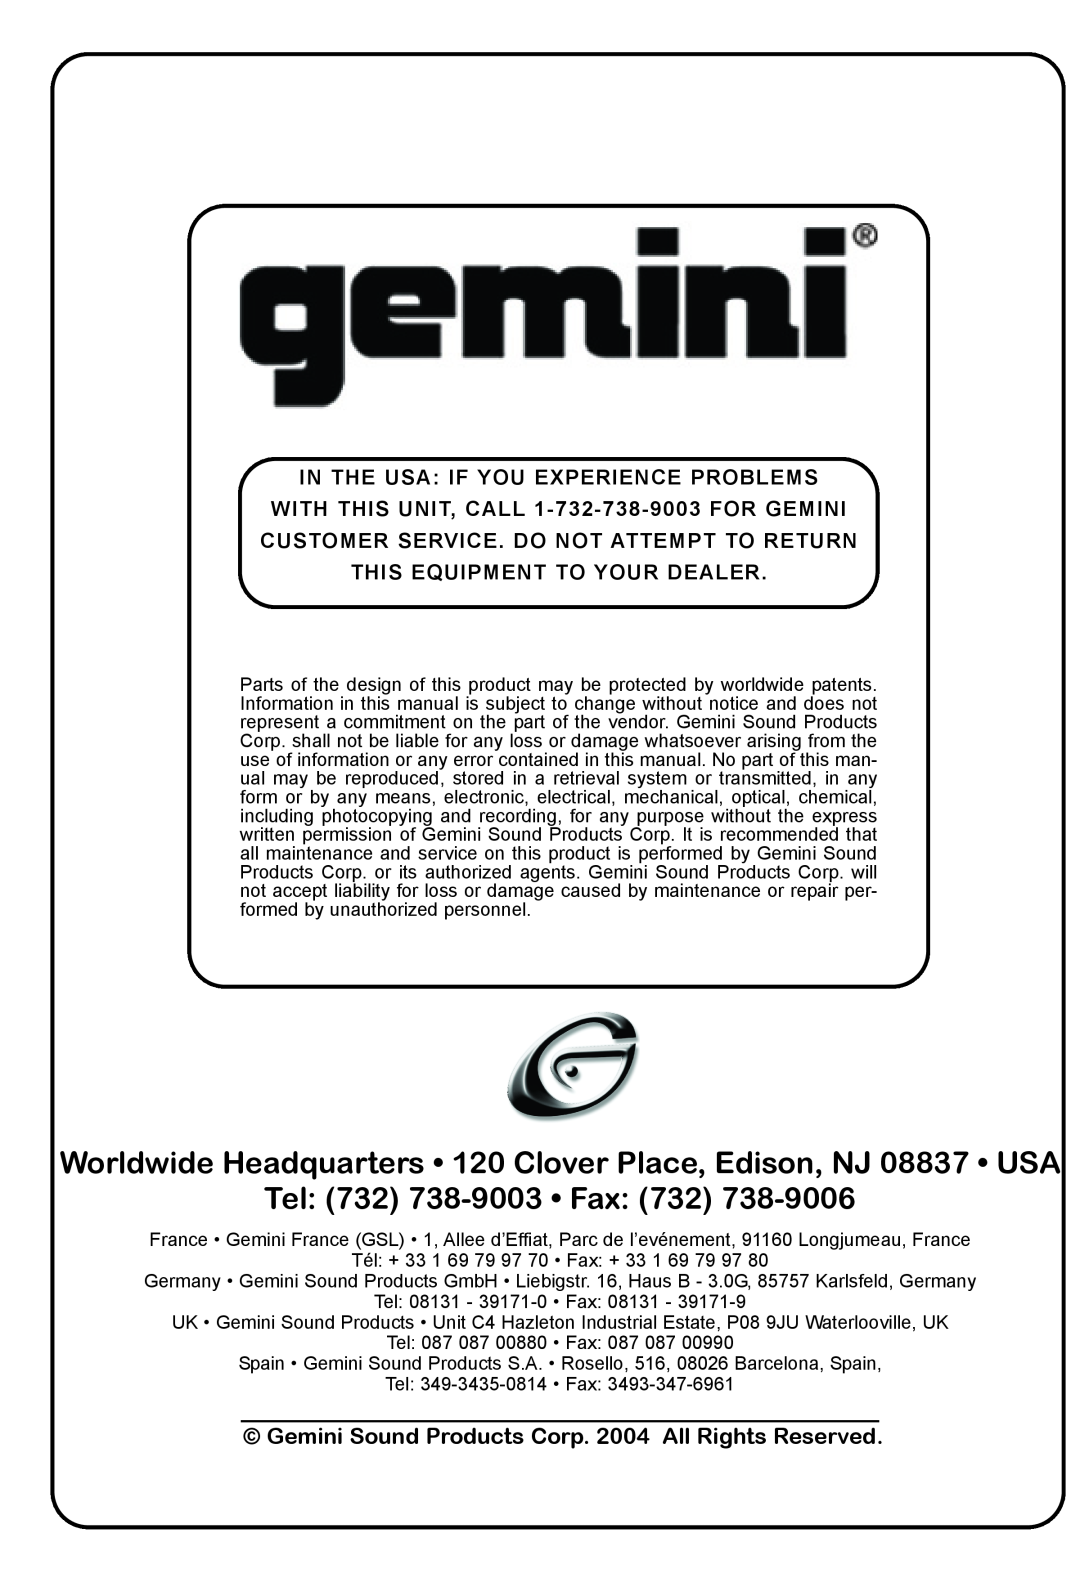 Gemini CD-150 Tel 732 738-9003 Fax, In The Usa If You Experience Problems, WITH THIS UNIT, CALL 1-732-738-9003FOR GEMINI 